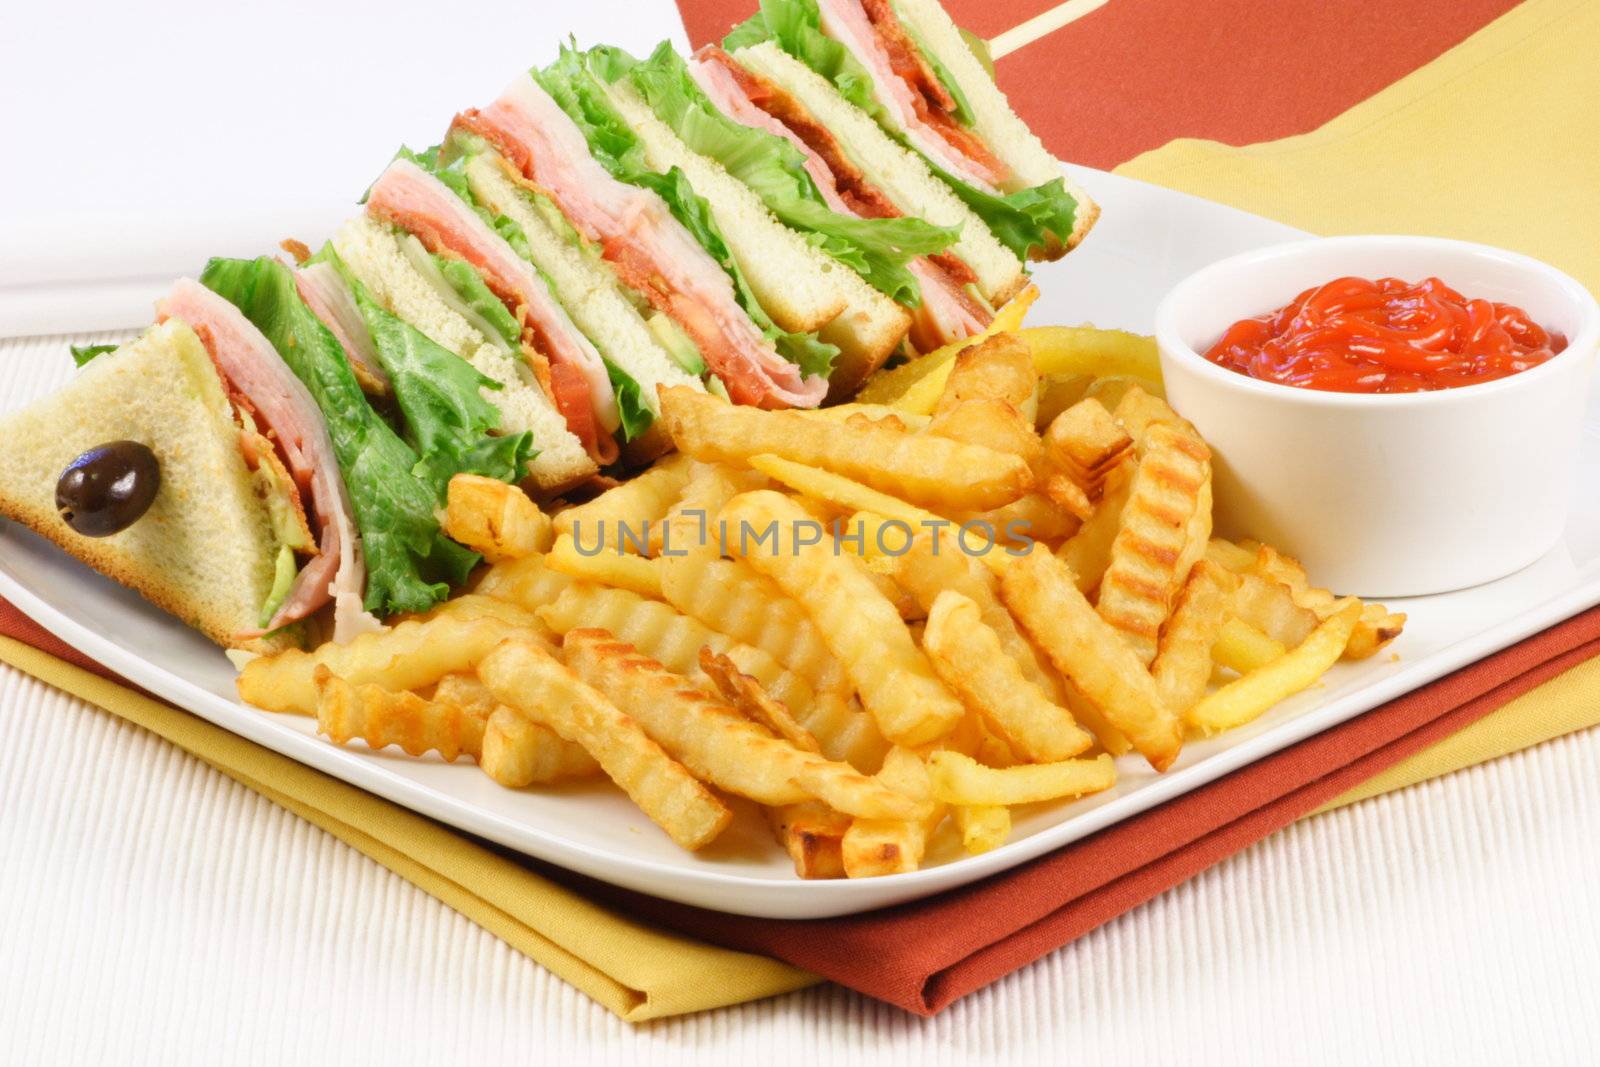 sandwich and fries by tacar